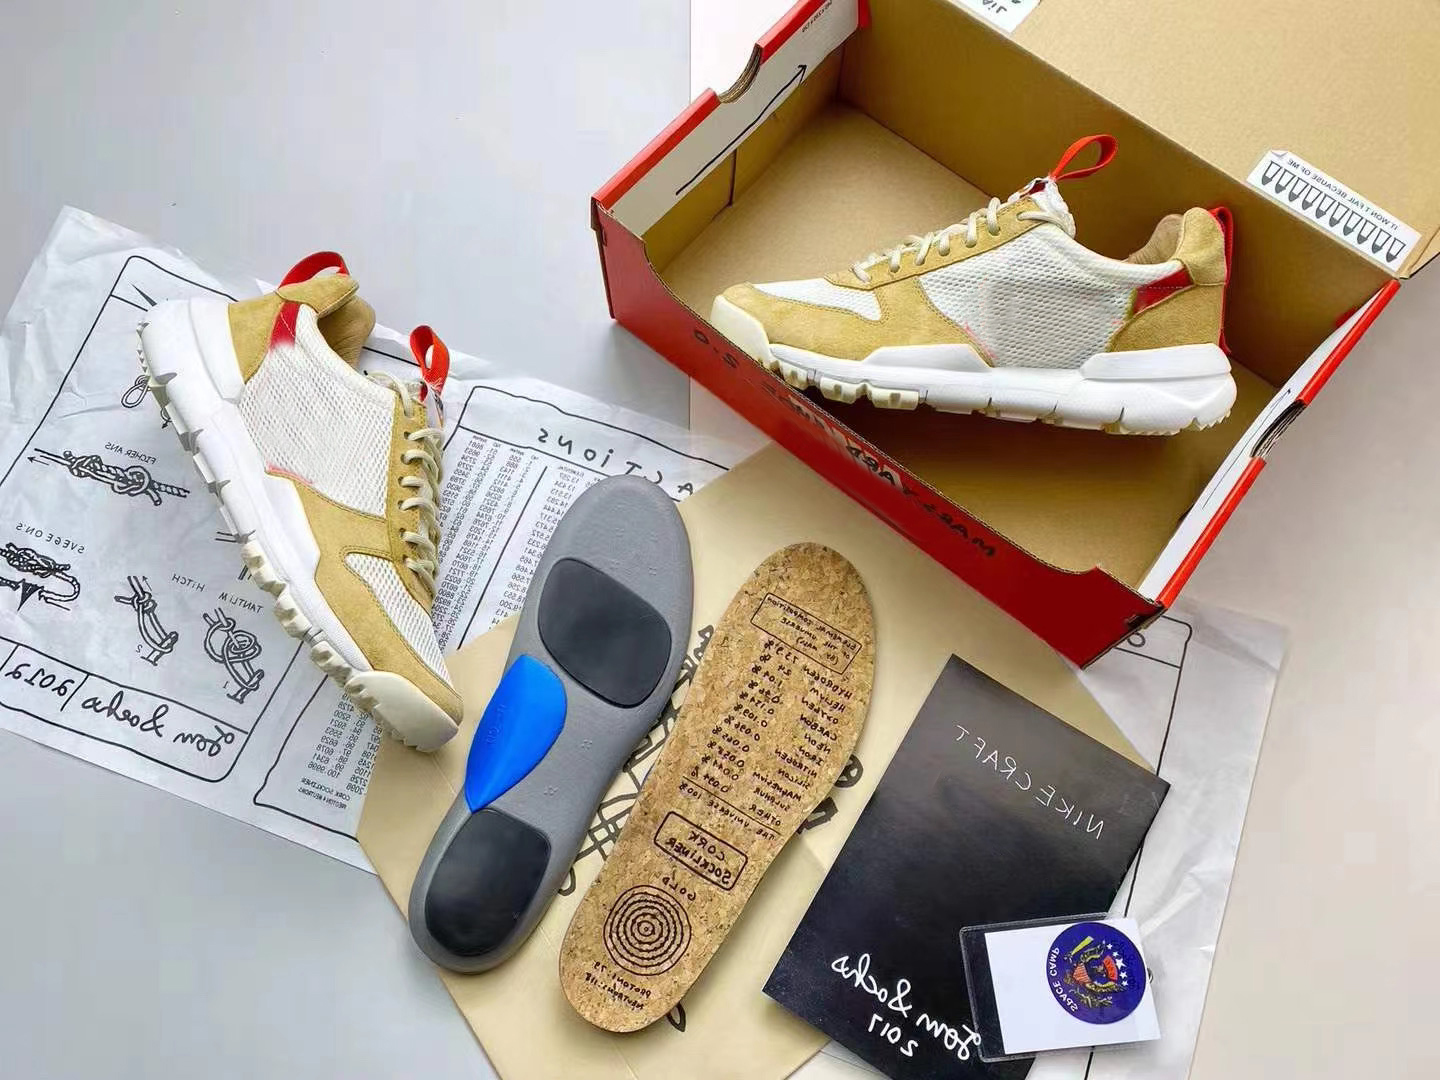 

Designer Shoes 2020 Authentic Tom Sachs x Craft Mars Yard 2.0 TS Joint Limited Sneaker Natural Sport Red Maple Authentic Running Original, Tom sachs x mars yard 2.0